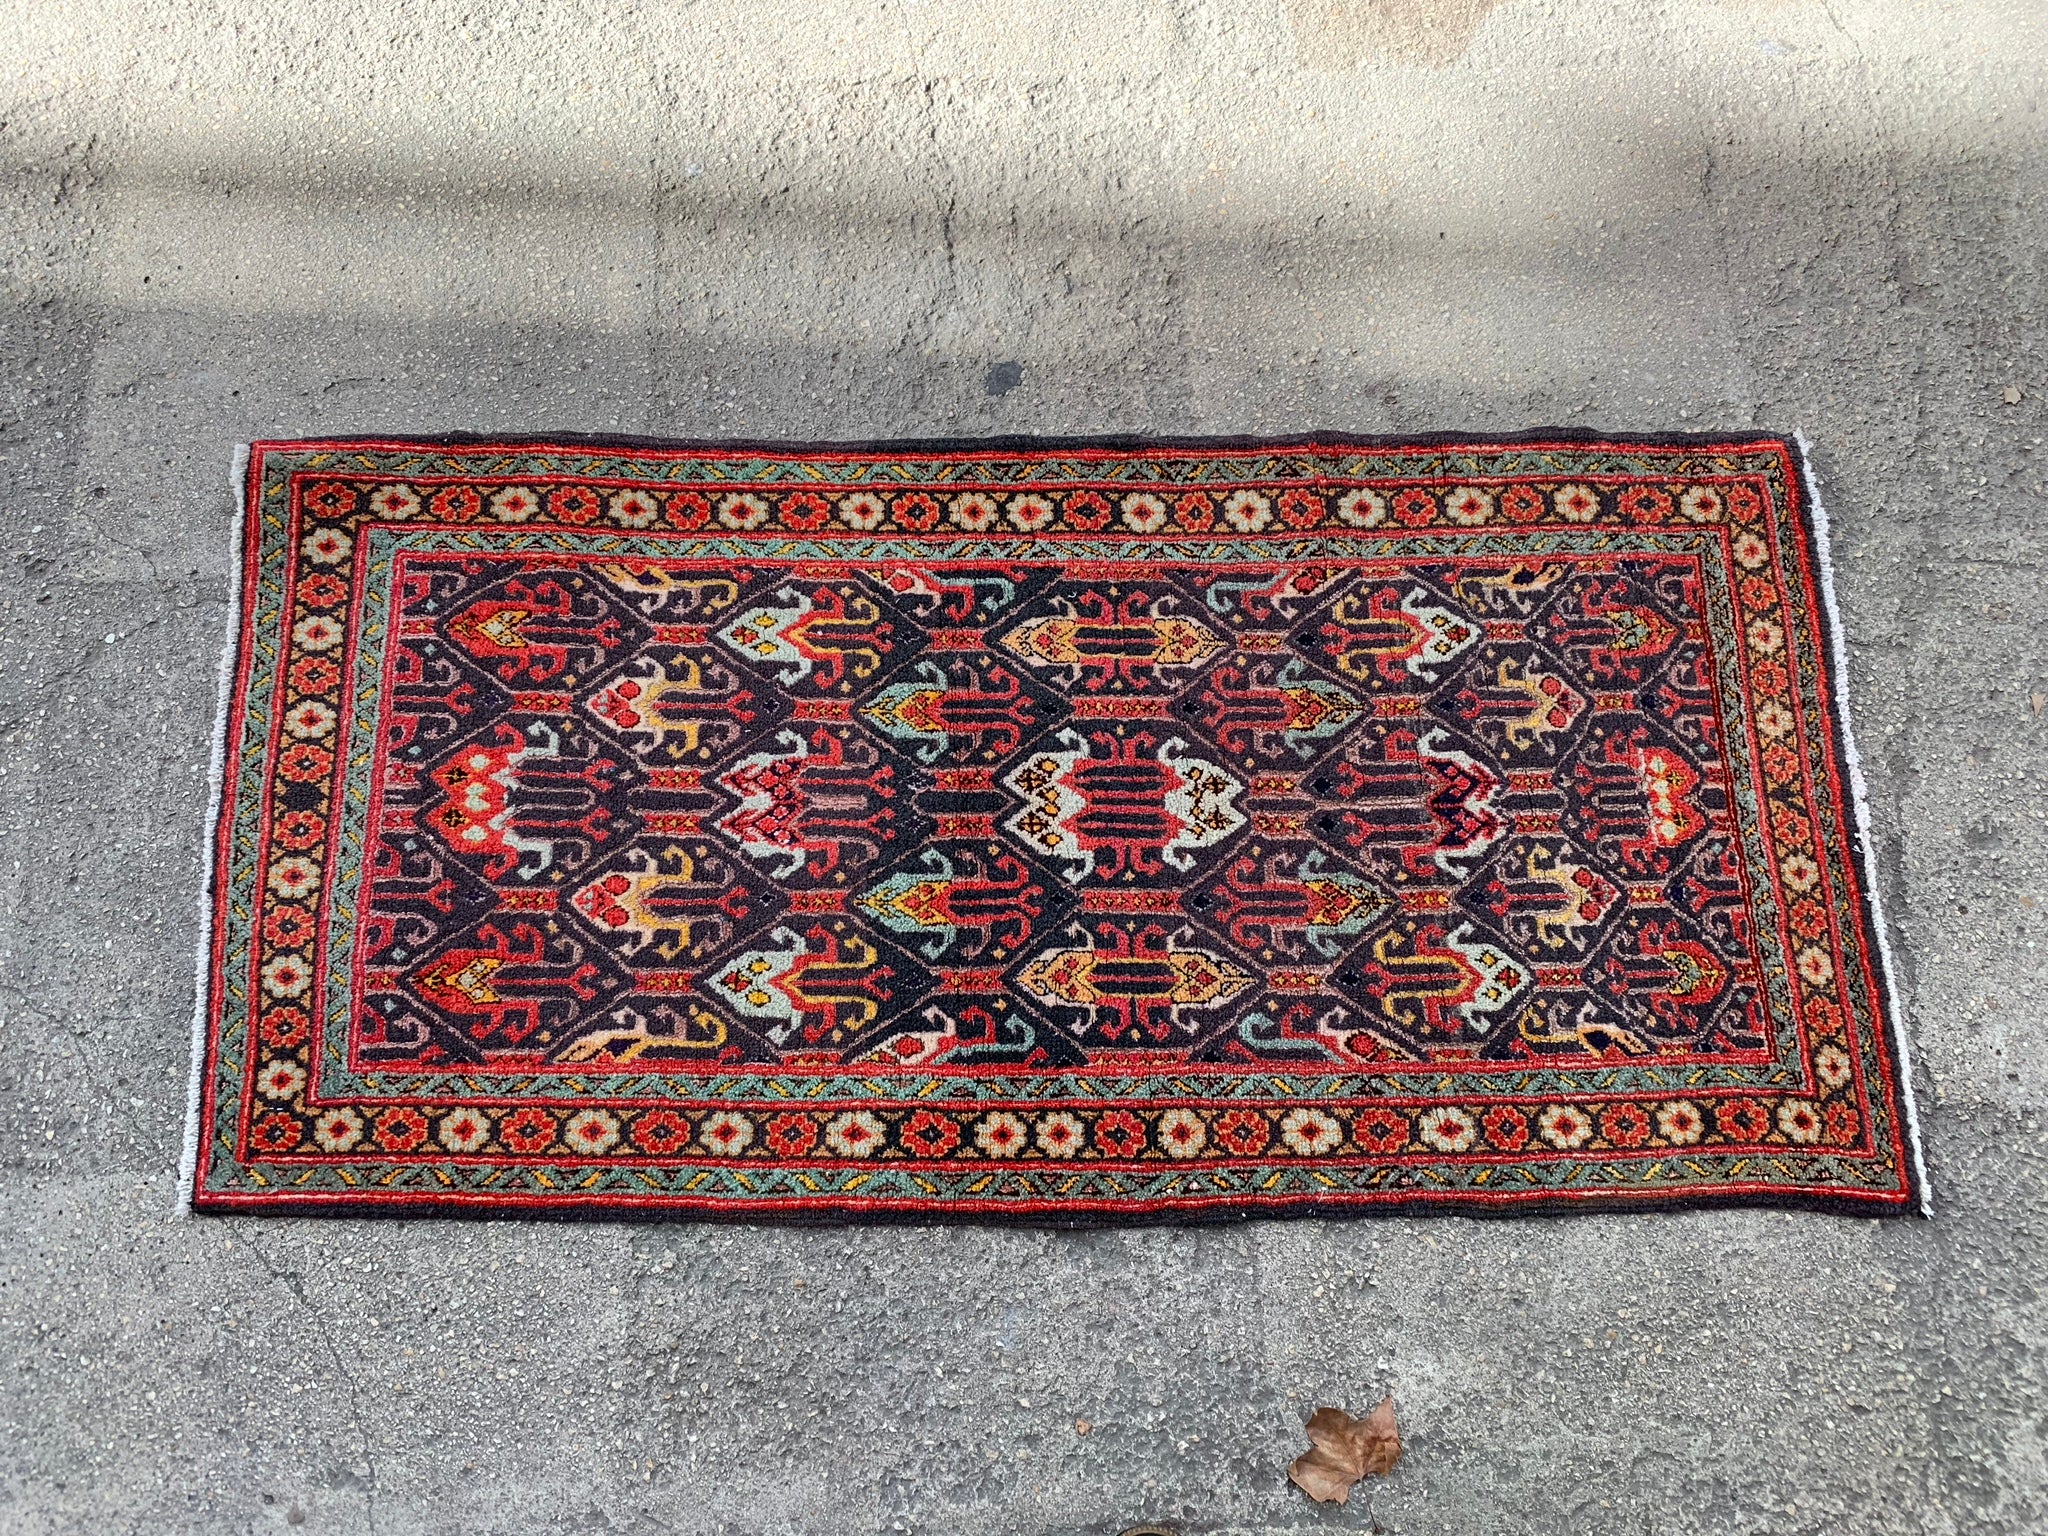 Vintage rug with authentic design, 2.1x4.2 ft, p515